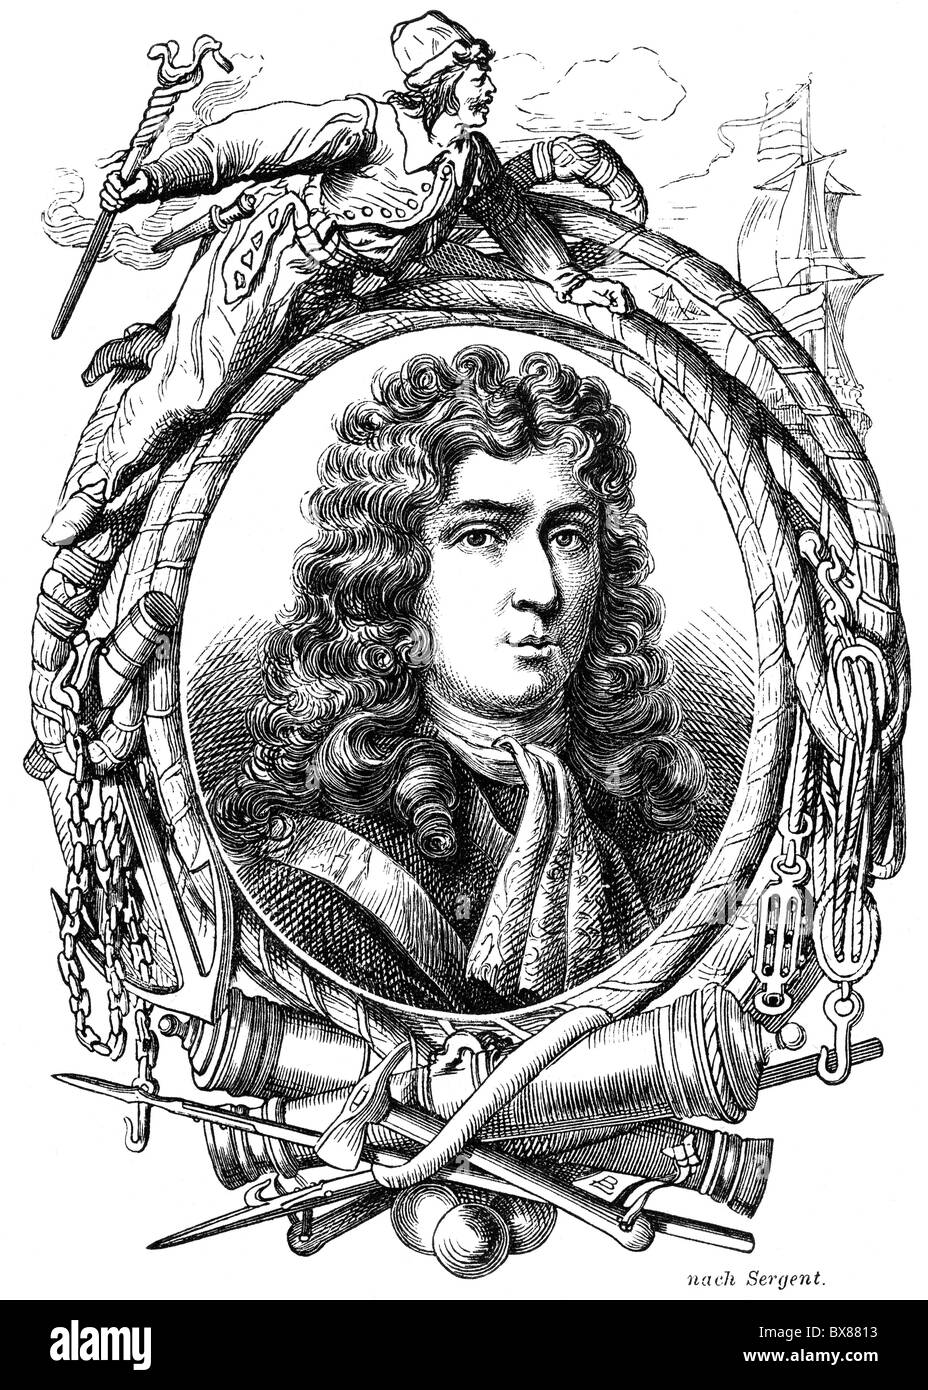 Costentin de Tourville, Anne Hilarion, 24.11.1642 - 23.5.1701, French admiral, portrait, wood engraving, 19th century, , Stock Photo